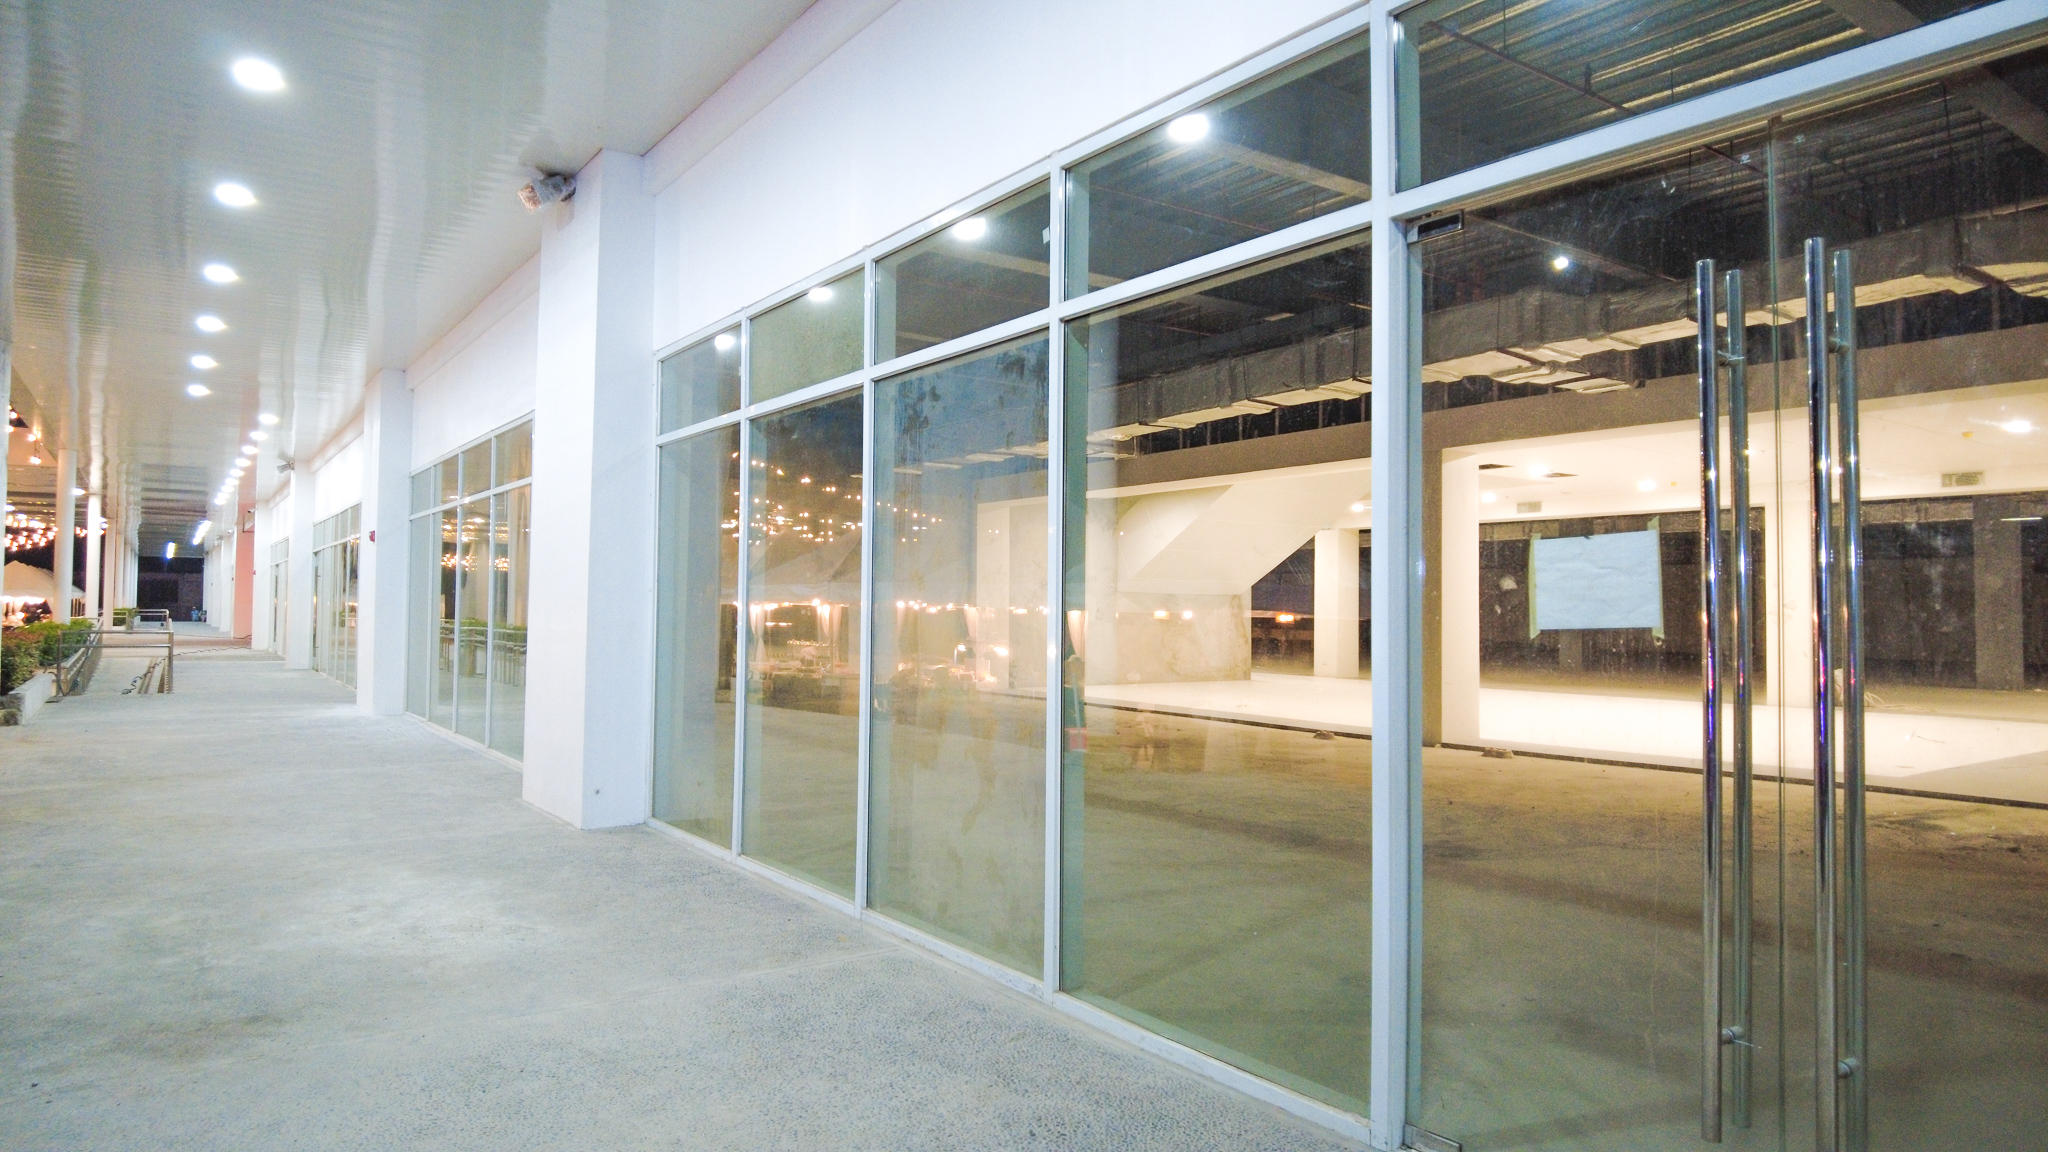 PRIME COMMERCIAL & RETAIL SPACE at 88 Square Mall